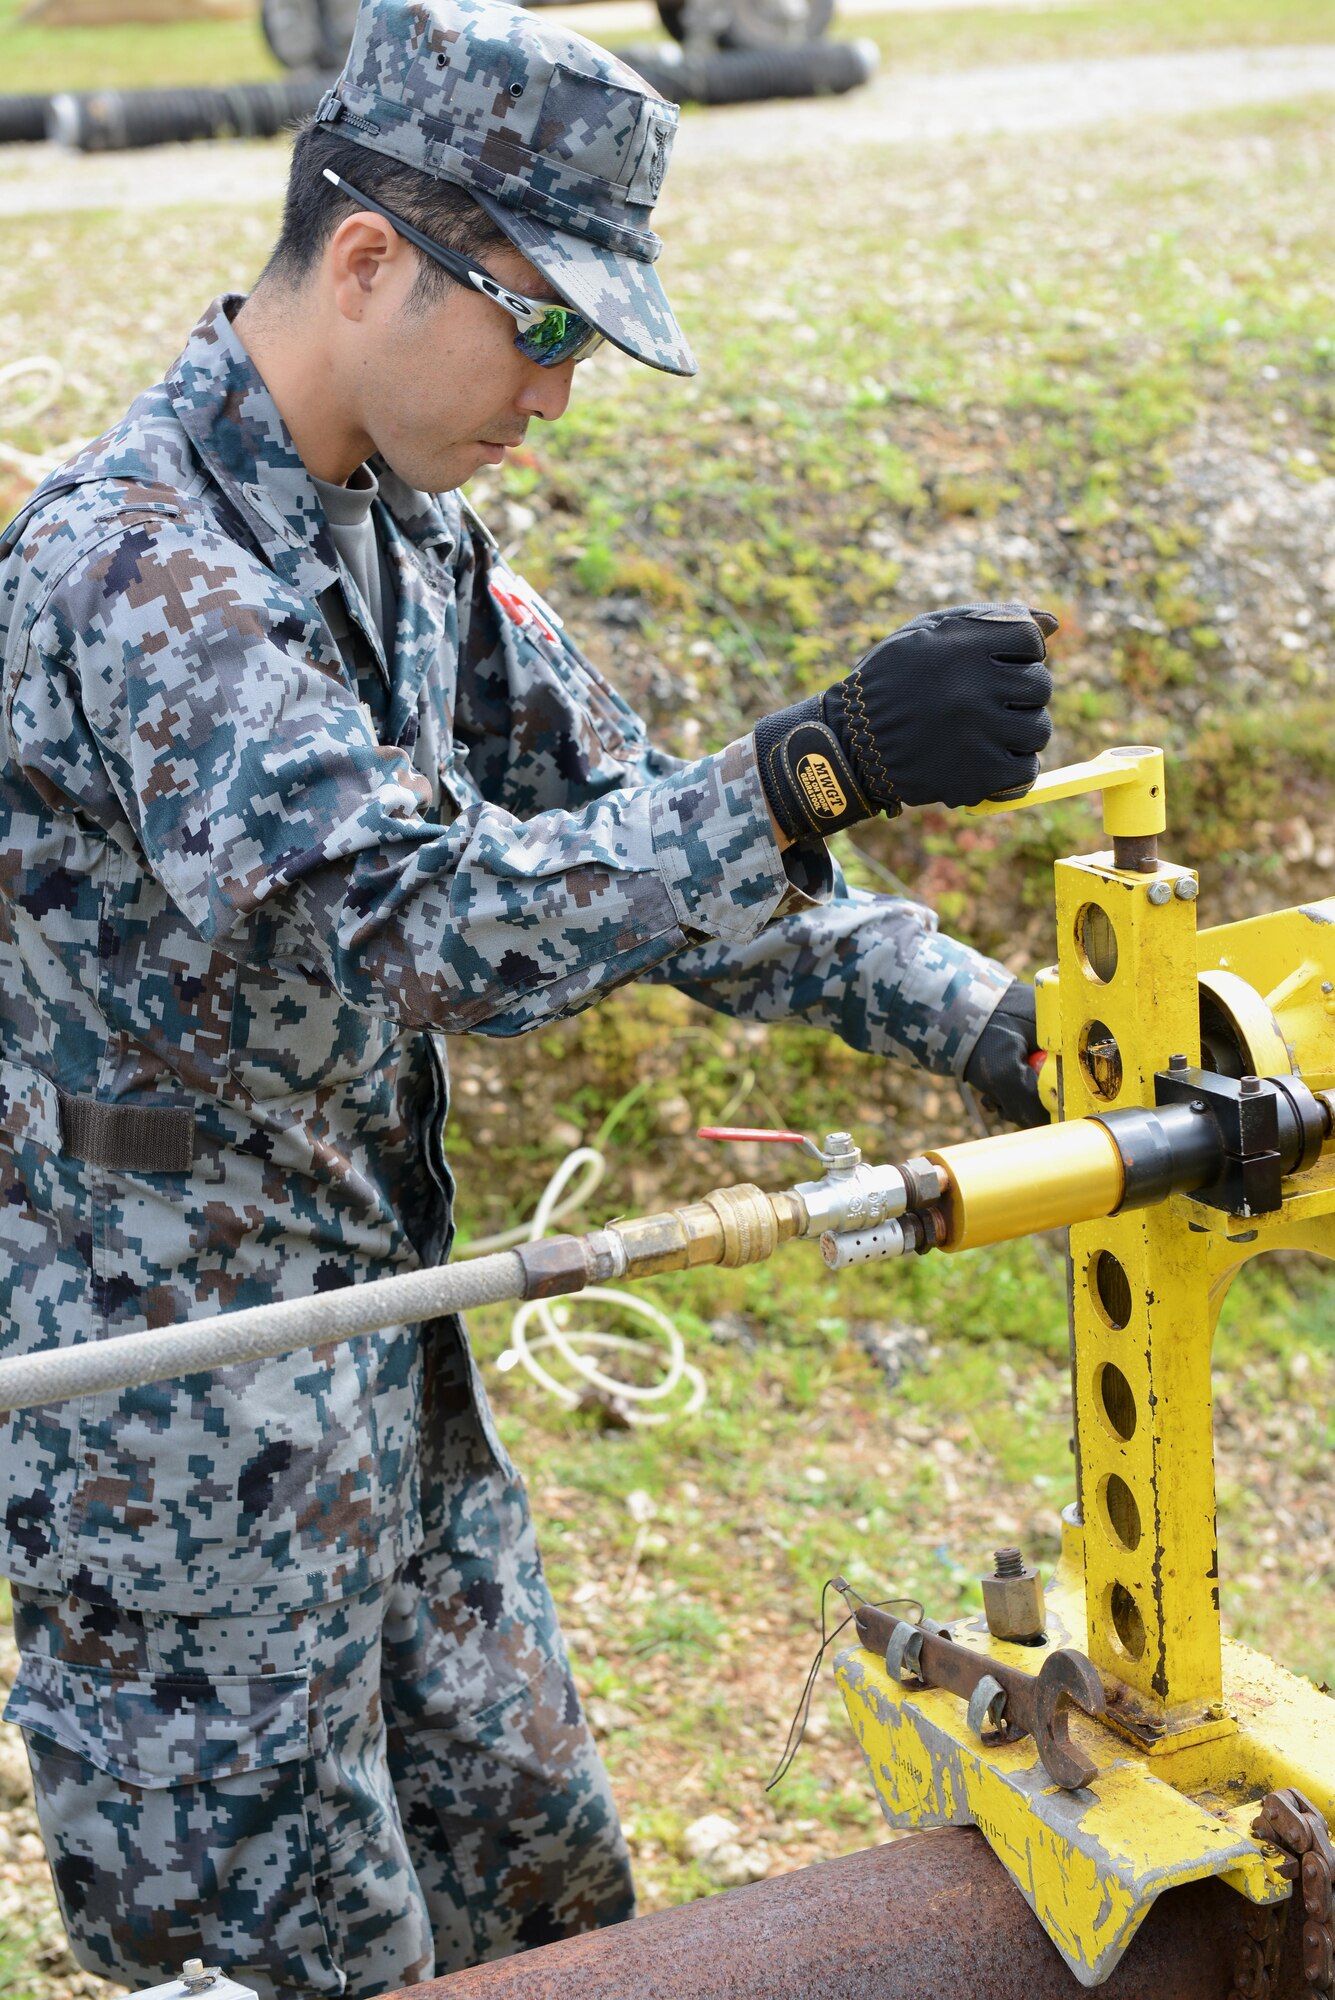 Japan Air Self-Defense Force Staff Sgt. Kentaro Ikeda repairs a fuel line during Silver Flag Dec. 1, 2016, at Northwest Field, Guam. Silver Flag is designed to engage, exercise and train with partner nation civil engineers to strengthen and increase interoperability. (U.S. Air Force photo by Senior Airman Arielle K. Vasquez/Released)